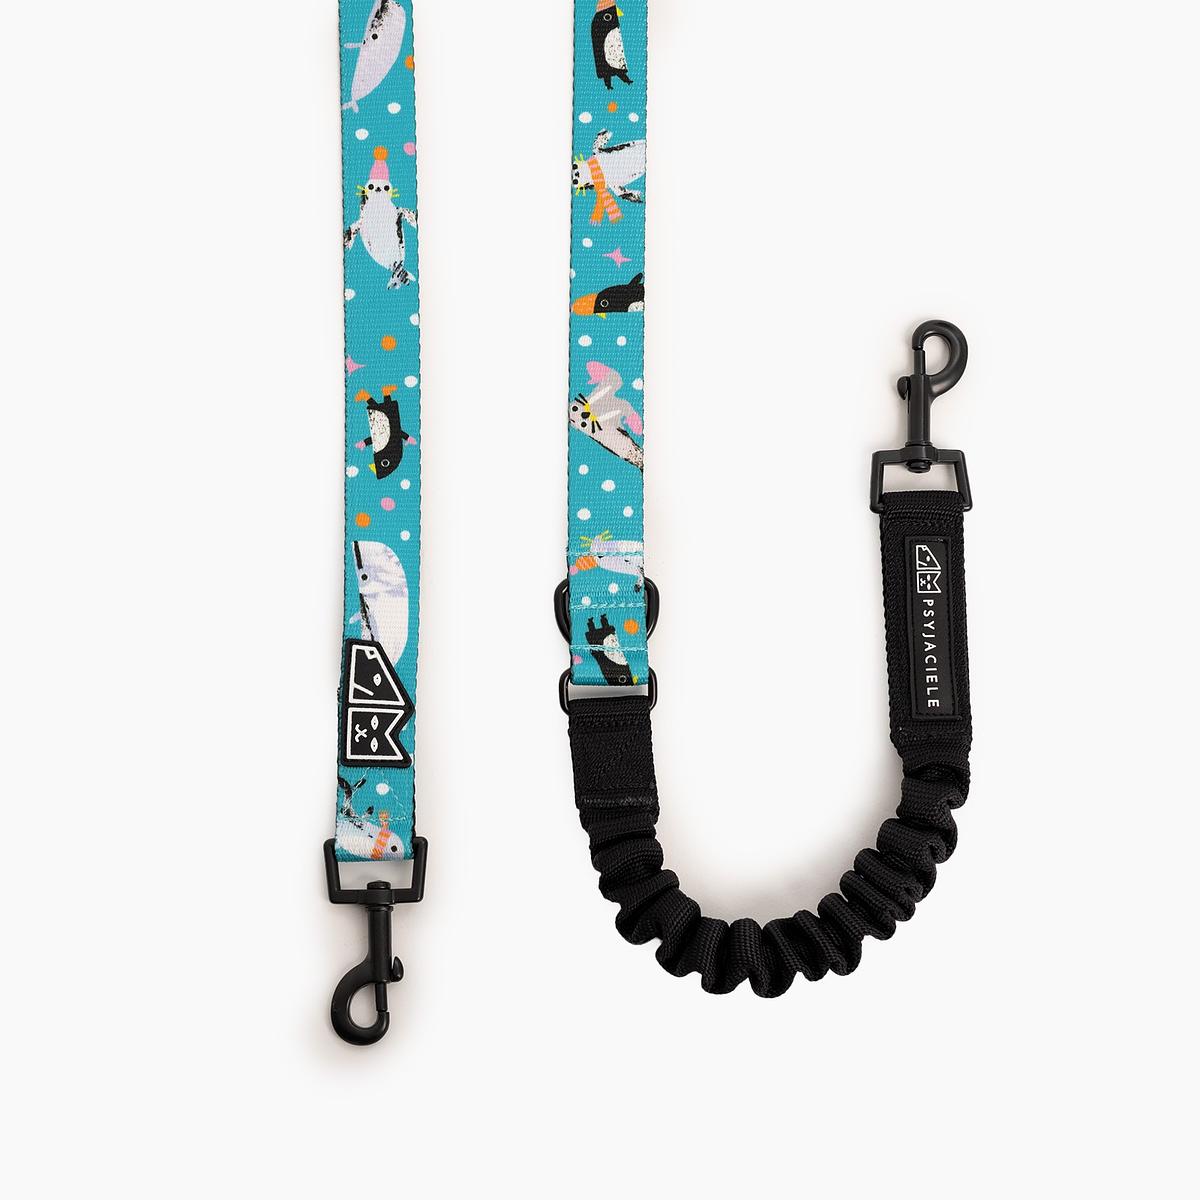 Adjustable leash with shock absorber "What does the seal said" 